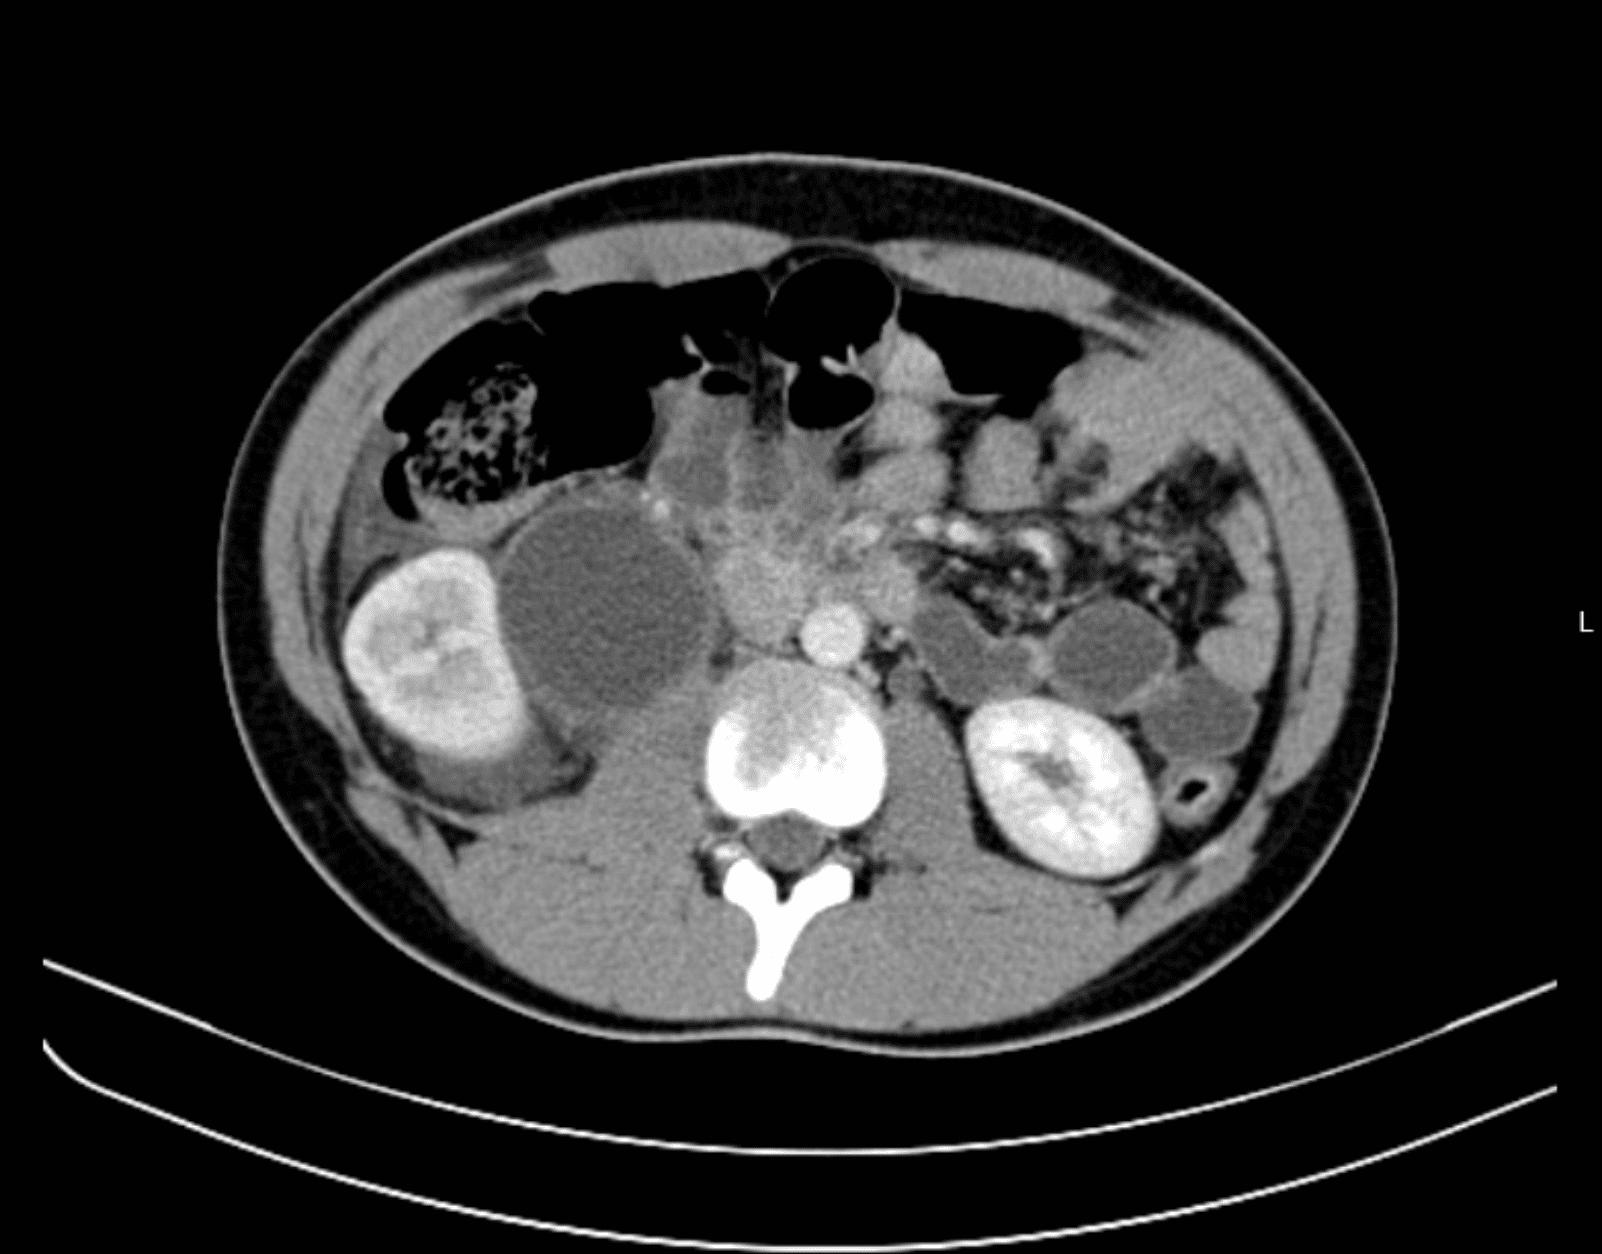 Enhanced Abdominal CT showing right hydronephrosis with dilatation of the renal pelvis and densification of the perirenal fat